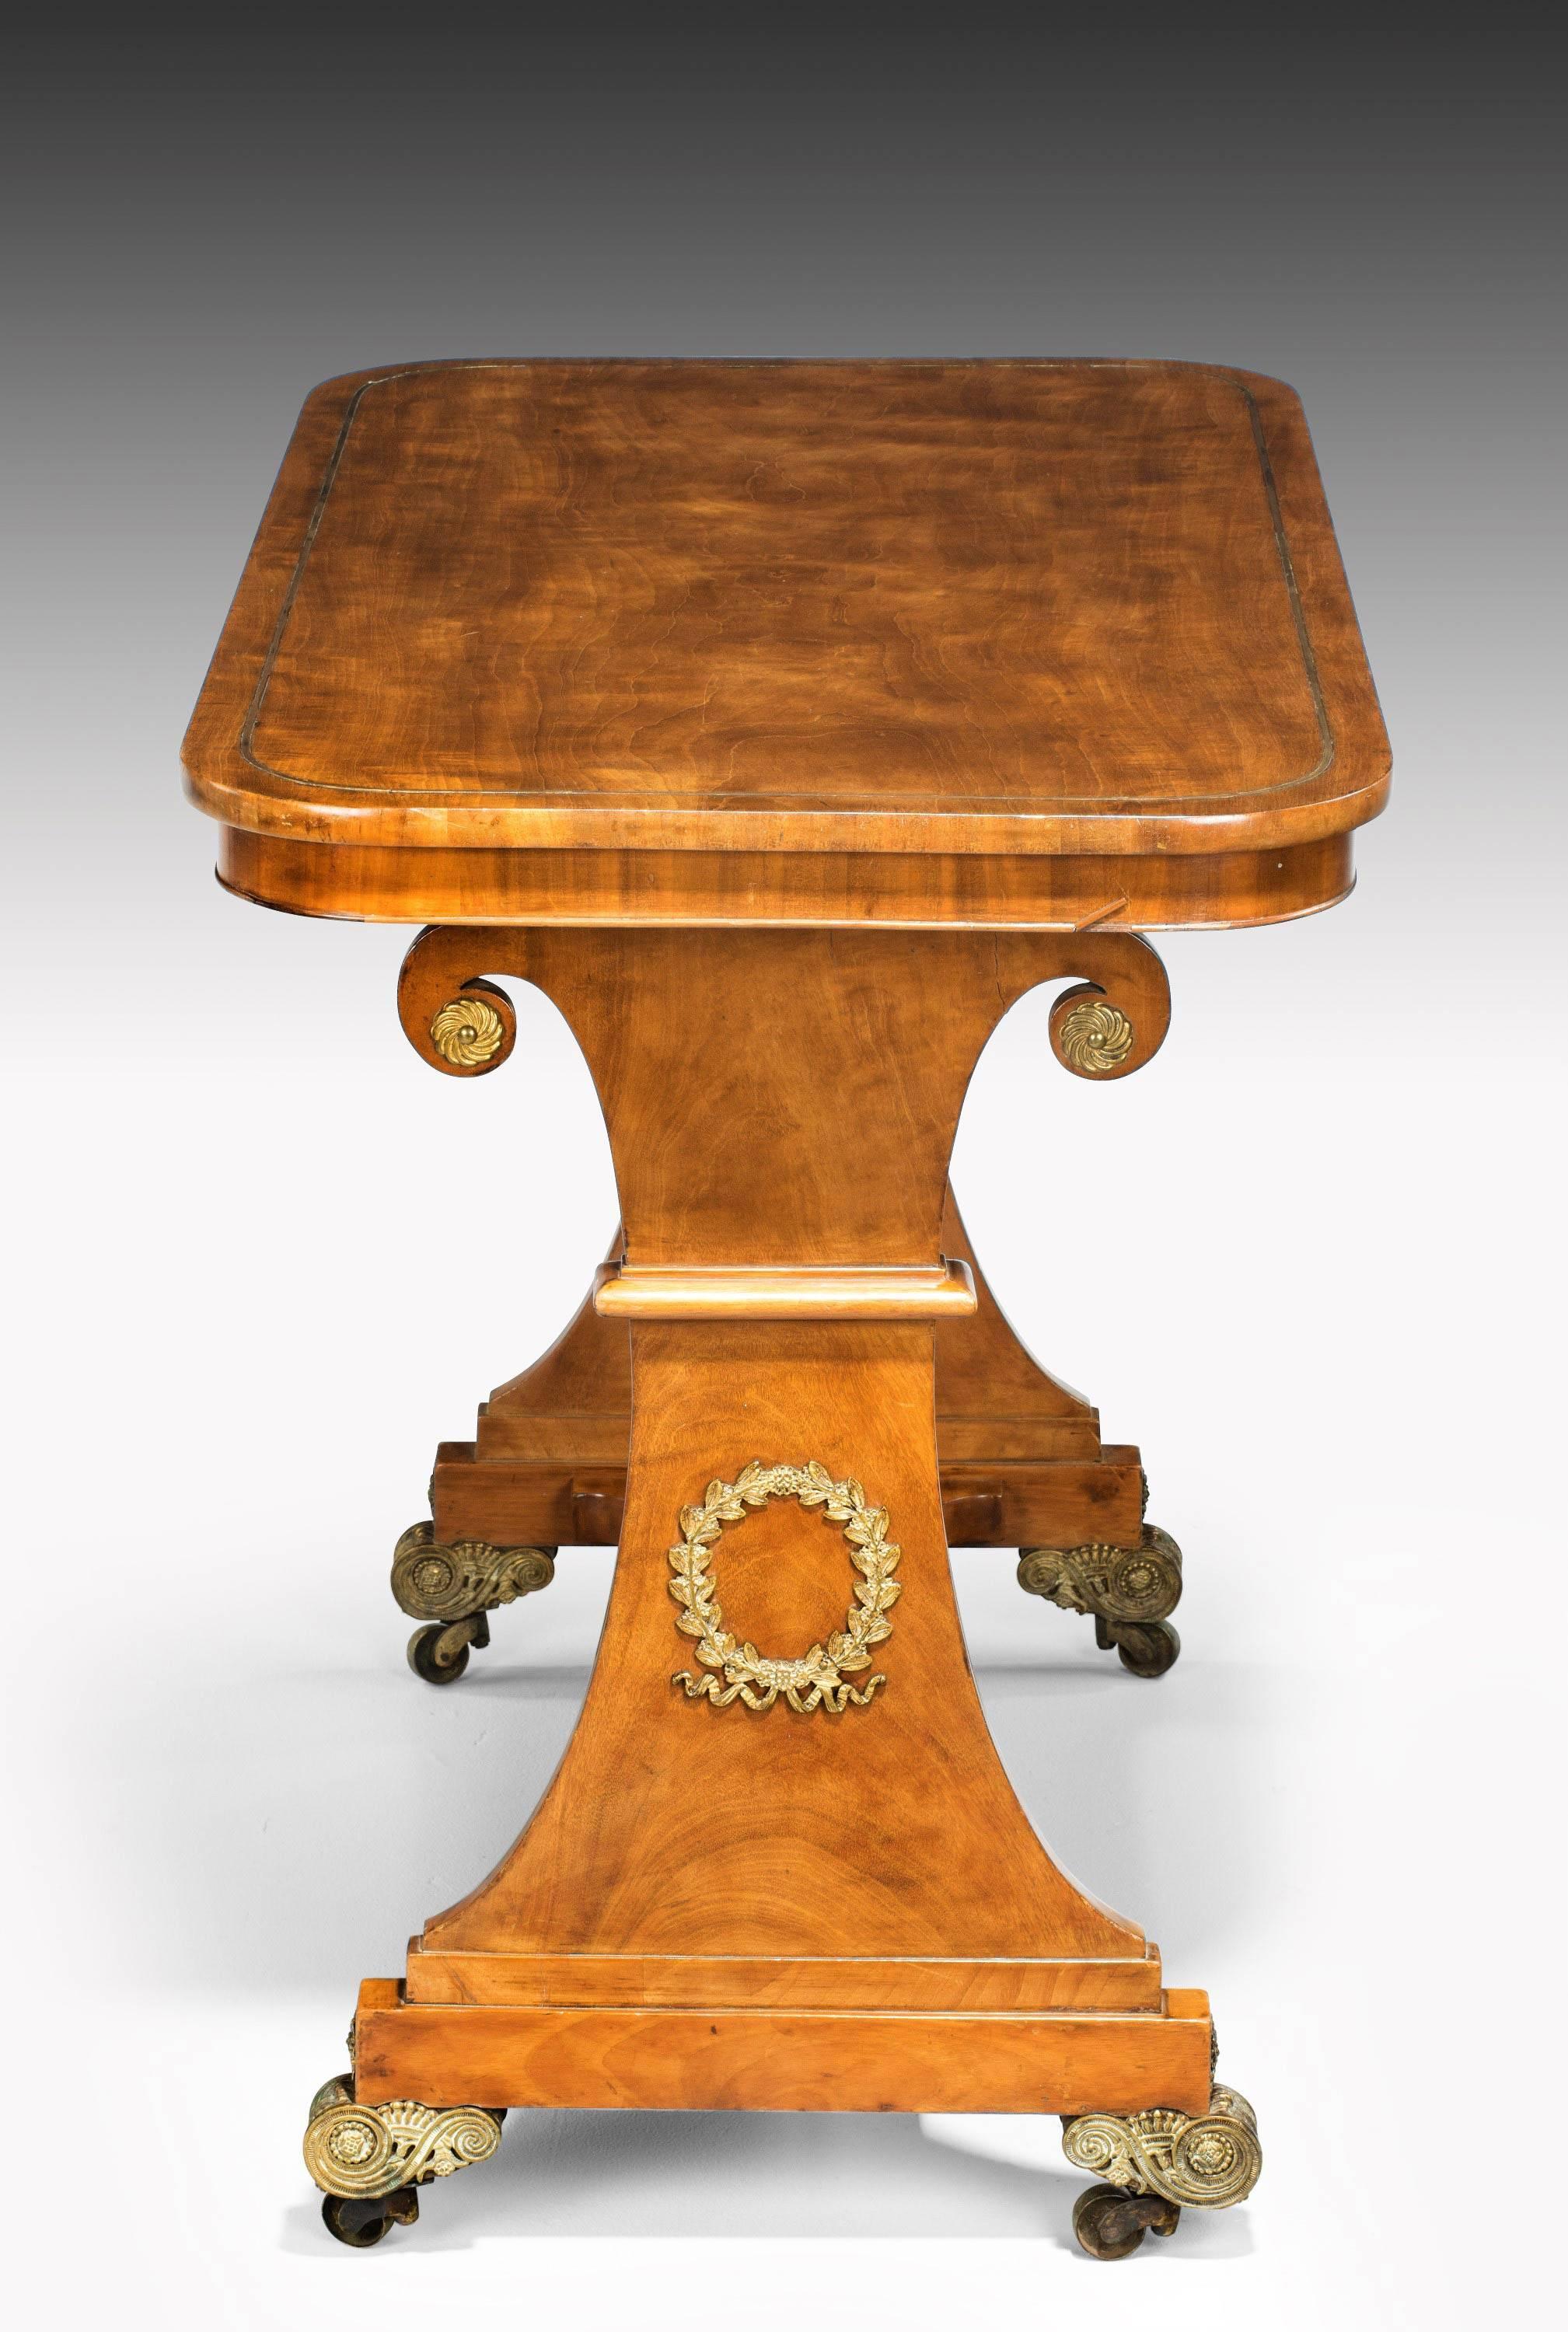 English Regency Period Satinwood End Support Table with Figured Ormolu Mounts